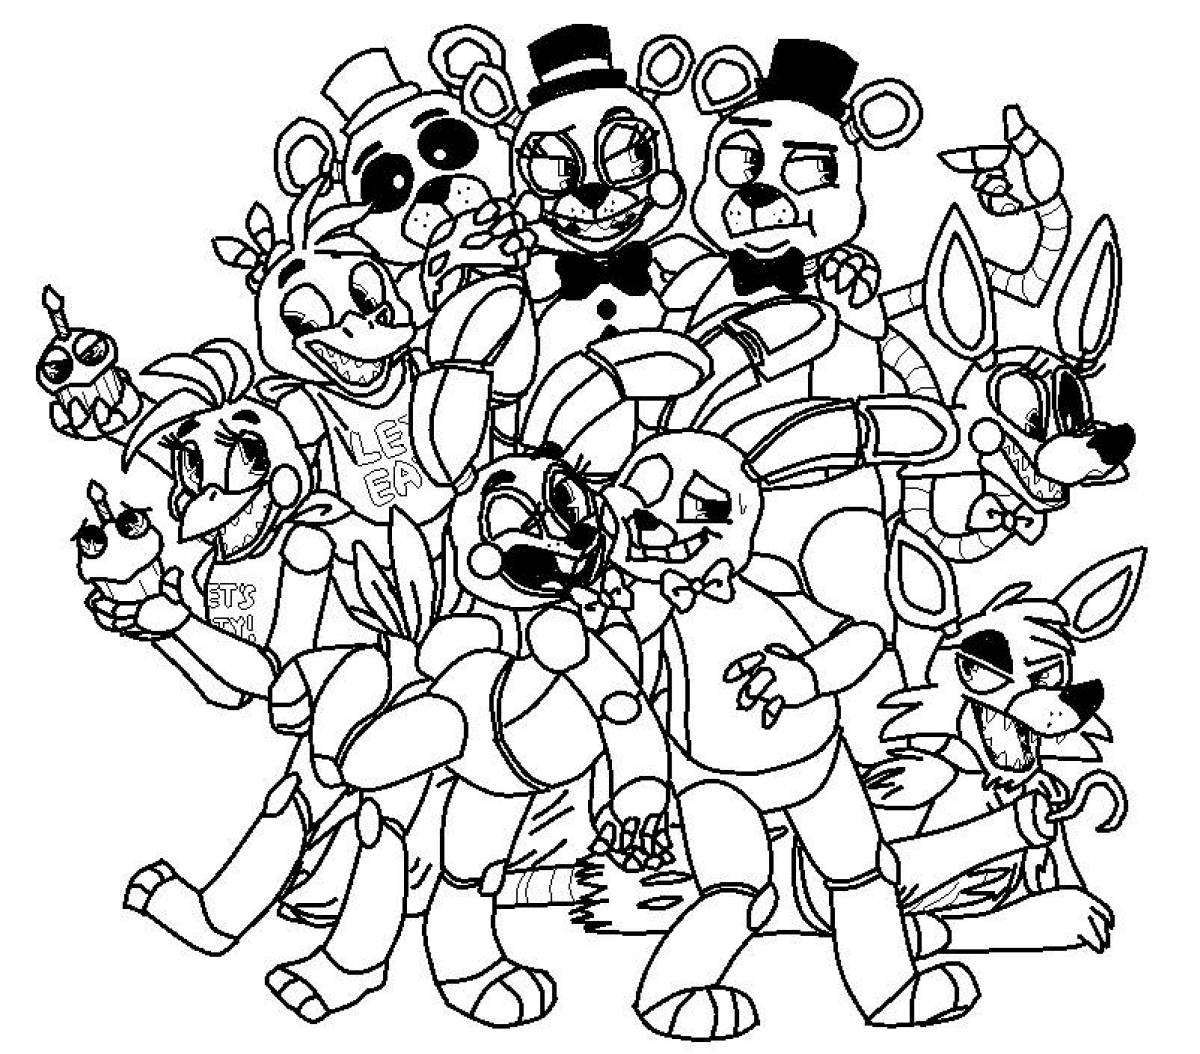 Colorful animatronics coloring page for all ages